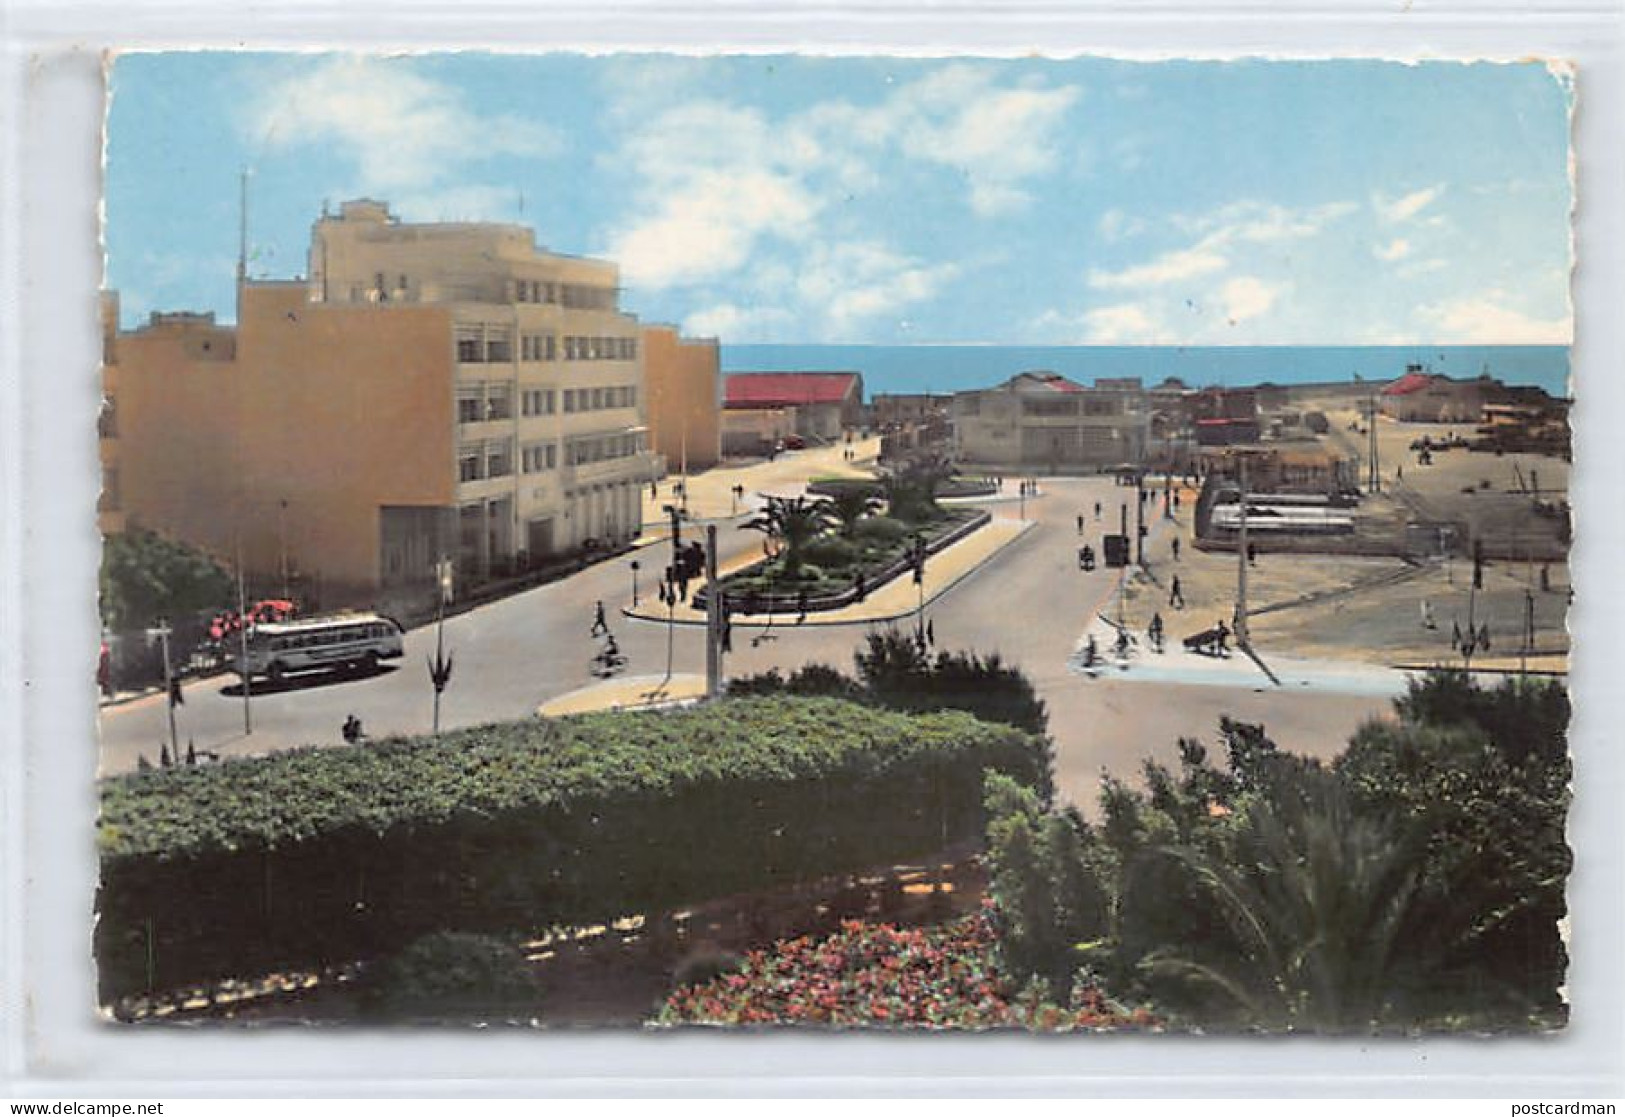 Tunisie - SOUSSE - Place Farhat Hached - Ed. G. Levy 1 - Tunisie